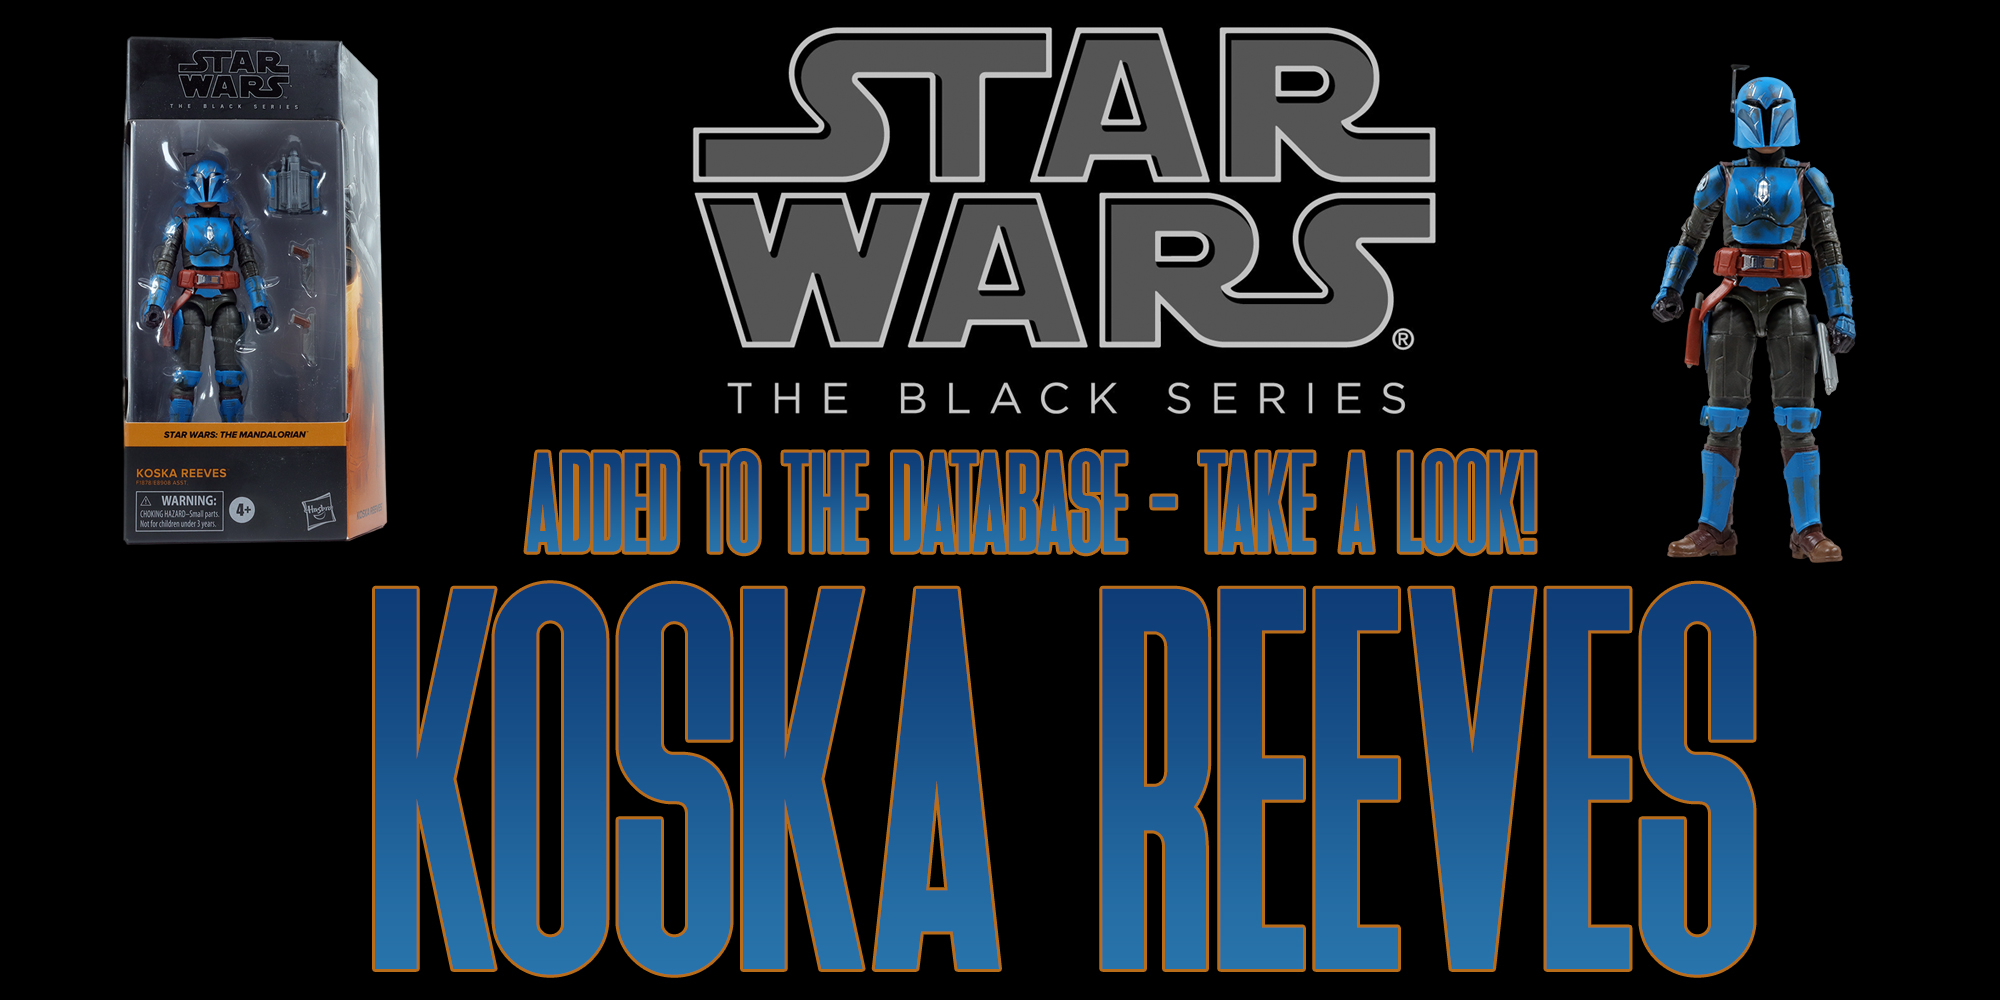 Koska Reeves Now Archived!